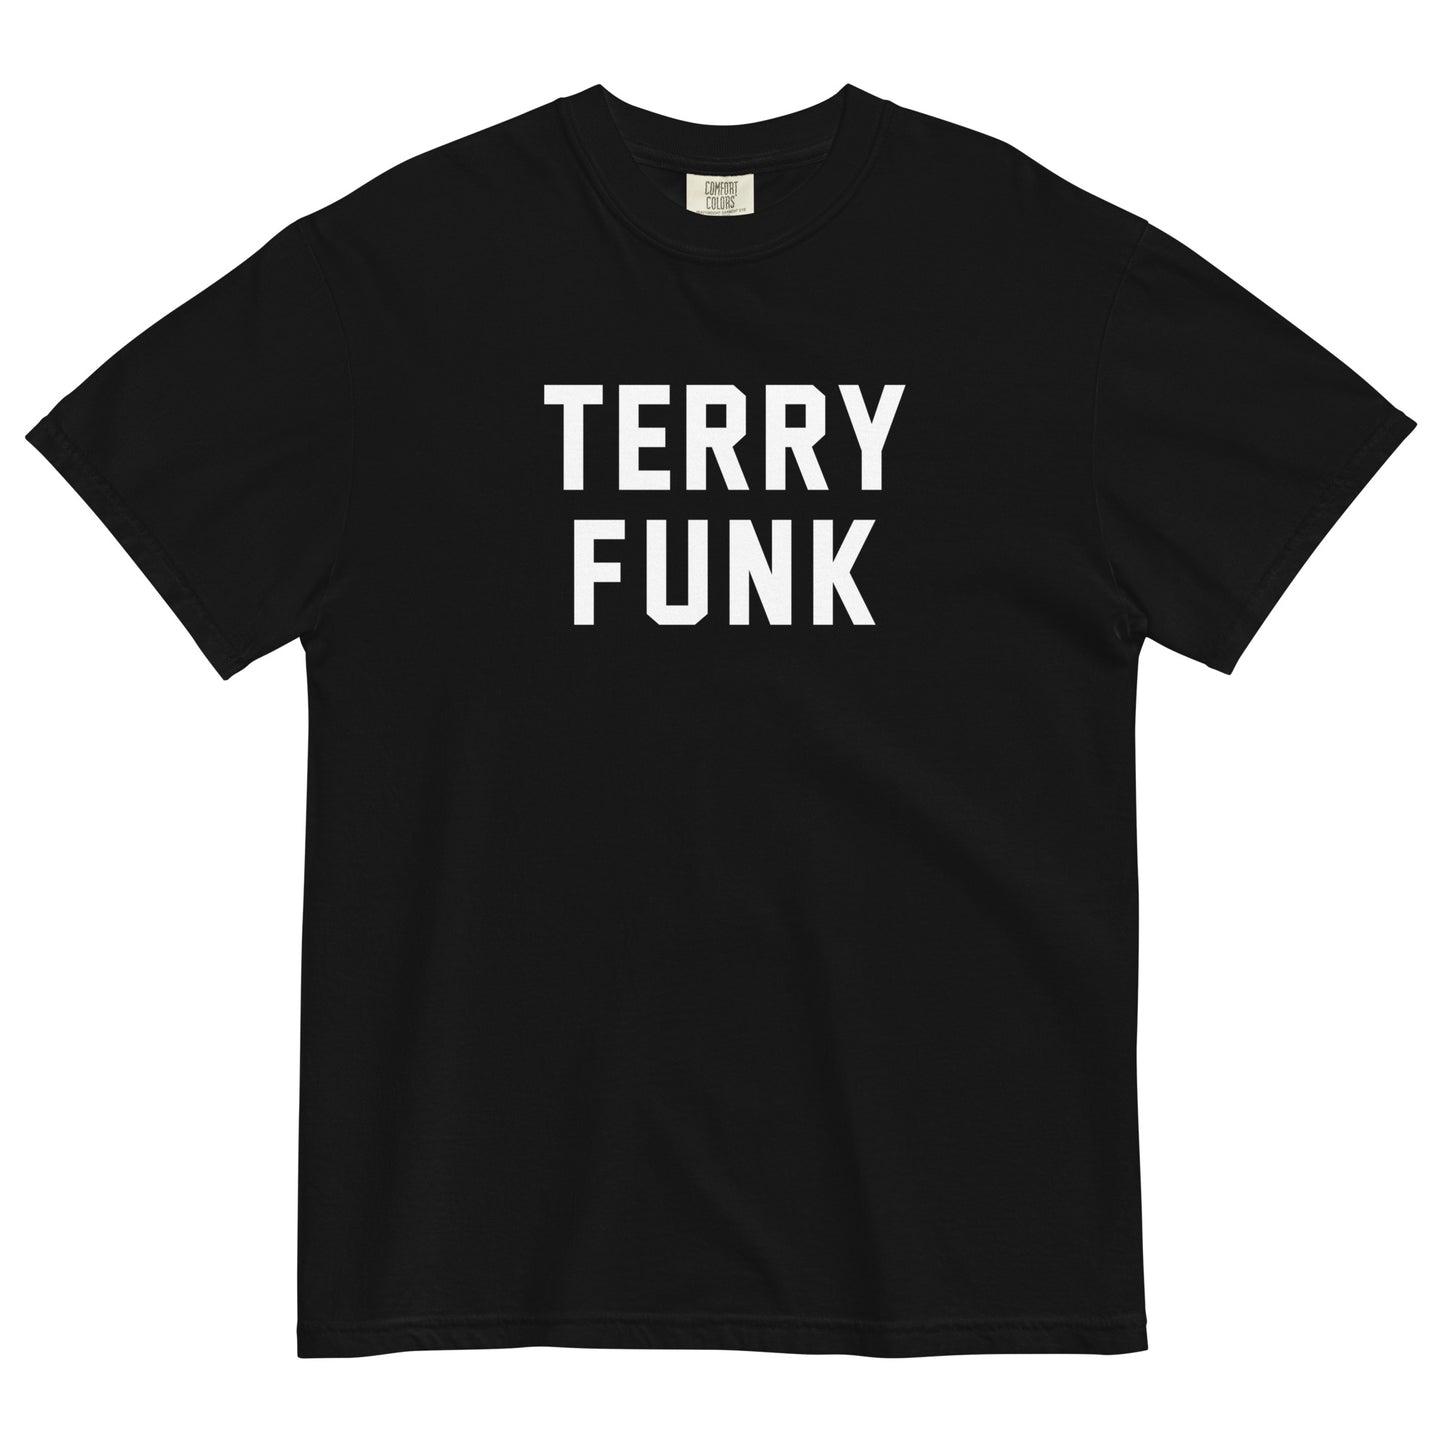 TERRY FUNK